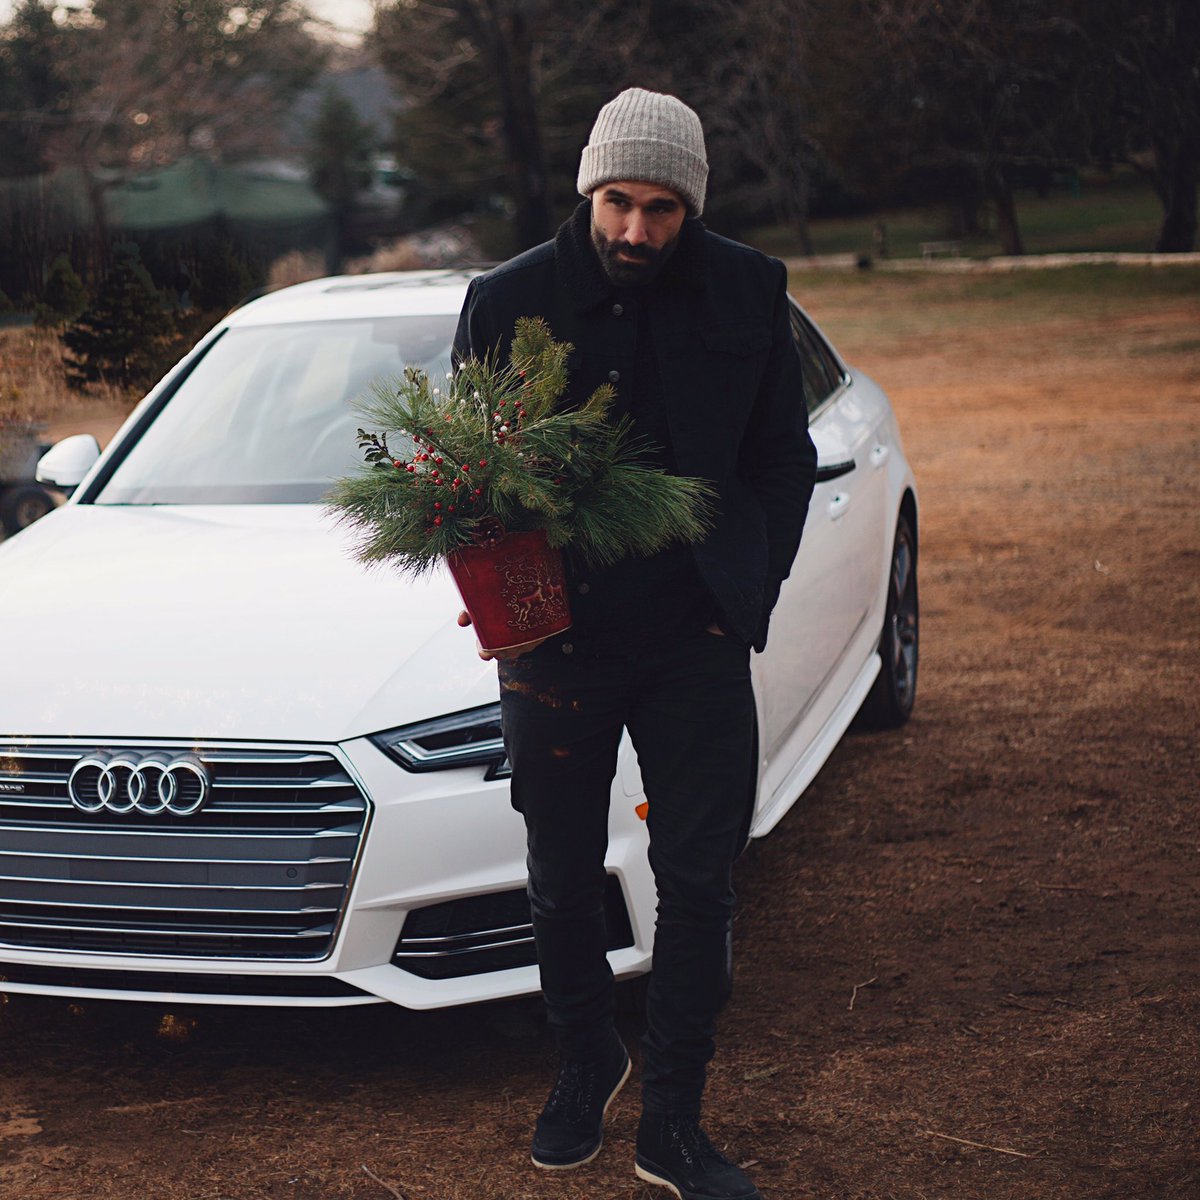 Picking out decorations, it reminds me what it's like to be a kid when we decorate our place.  @audi #A4 #audipartner